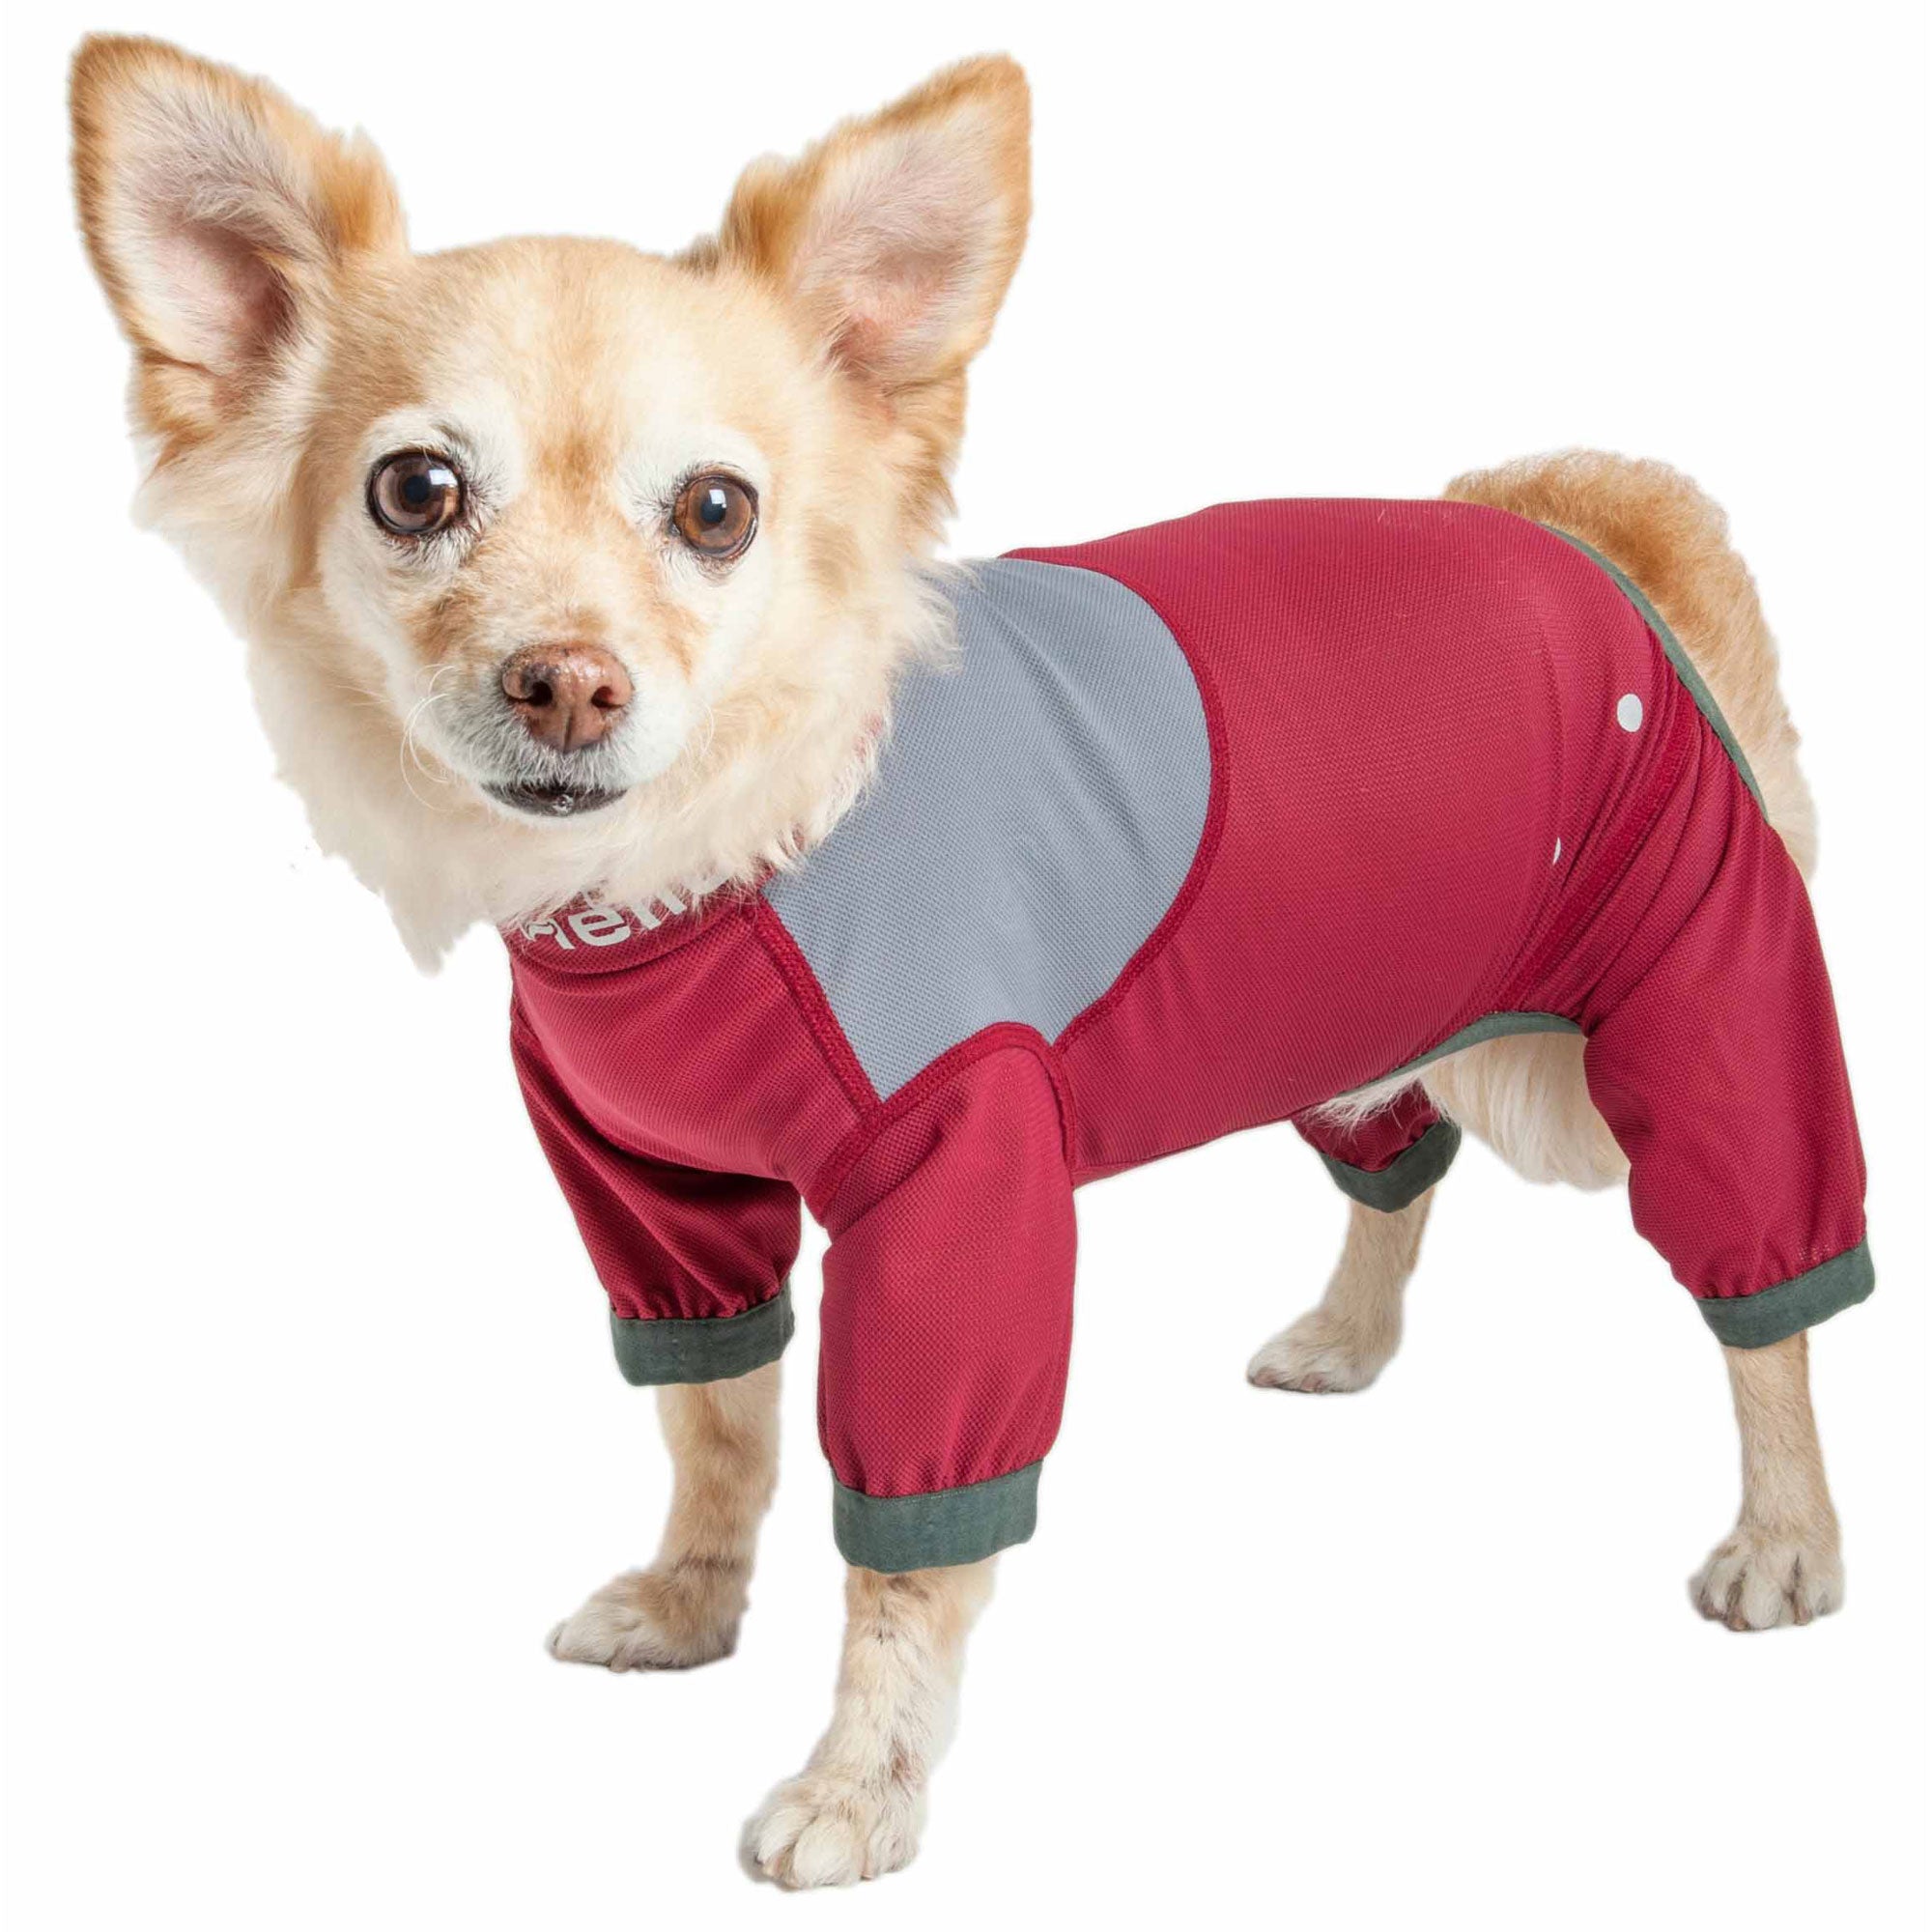 Dog Helios® Tail Runner Dog Track Suit - Red & Gray - Large